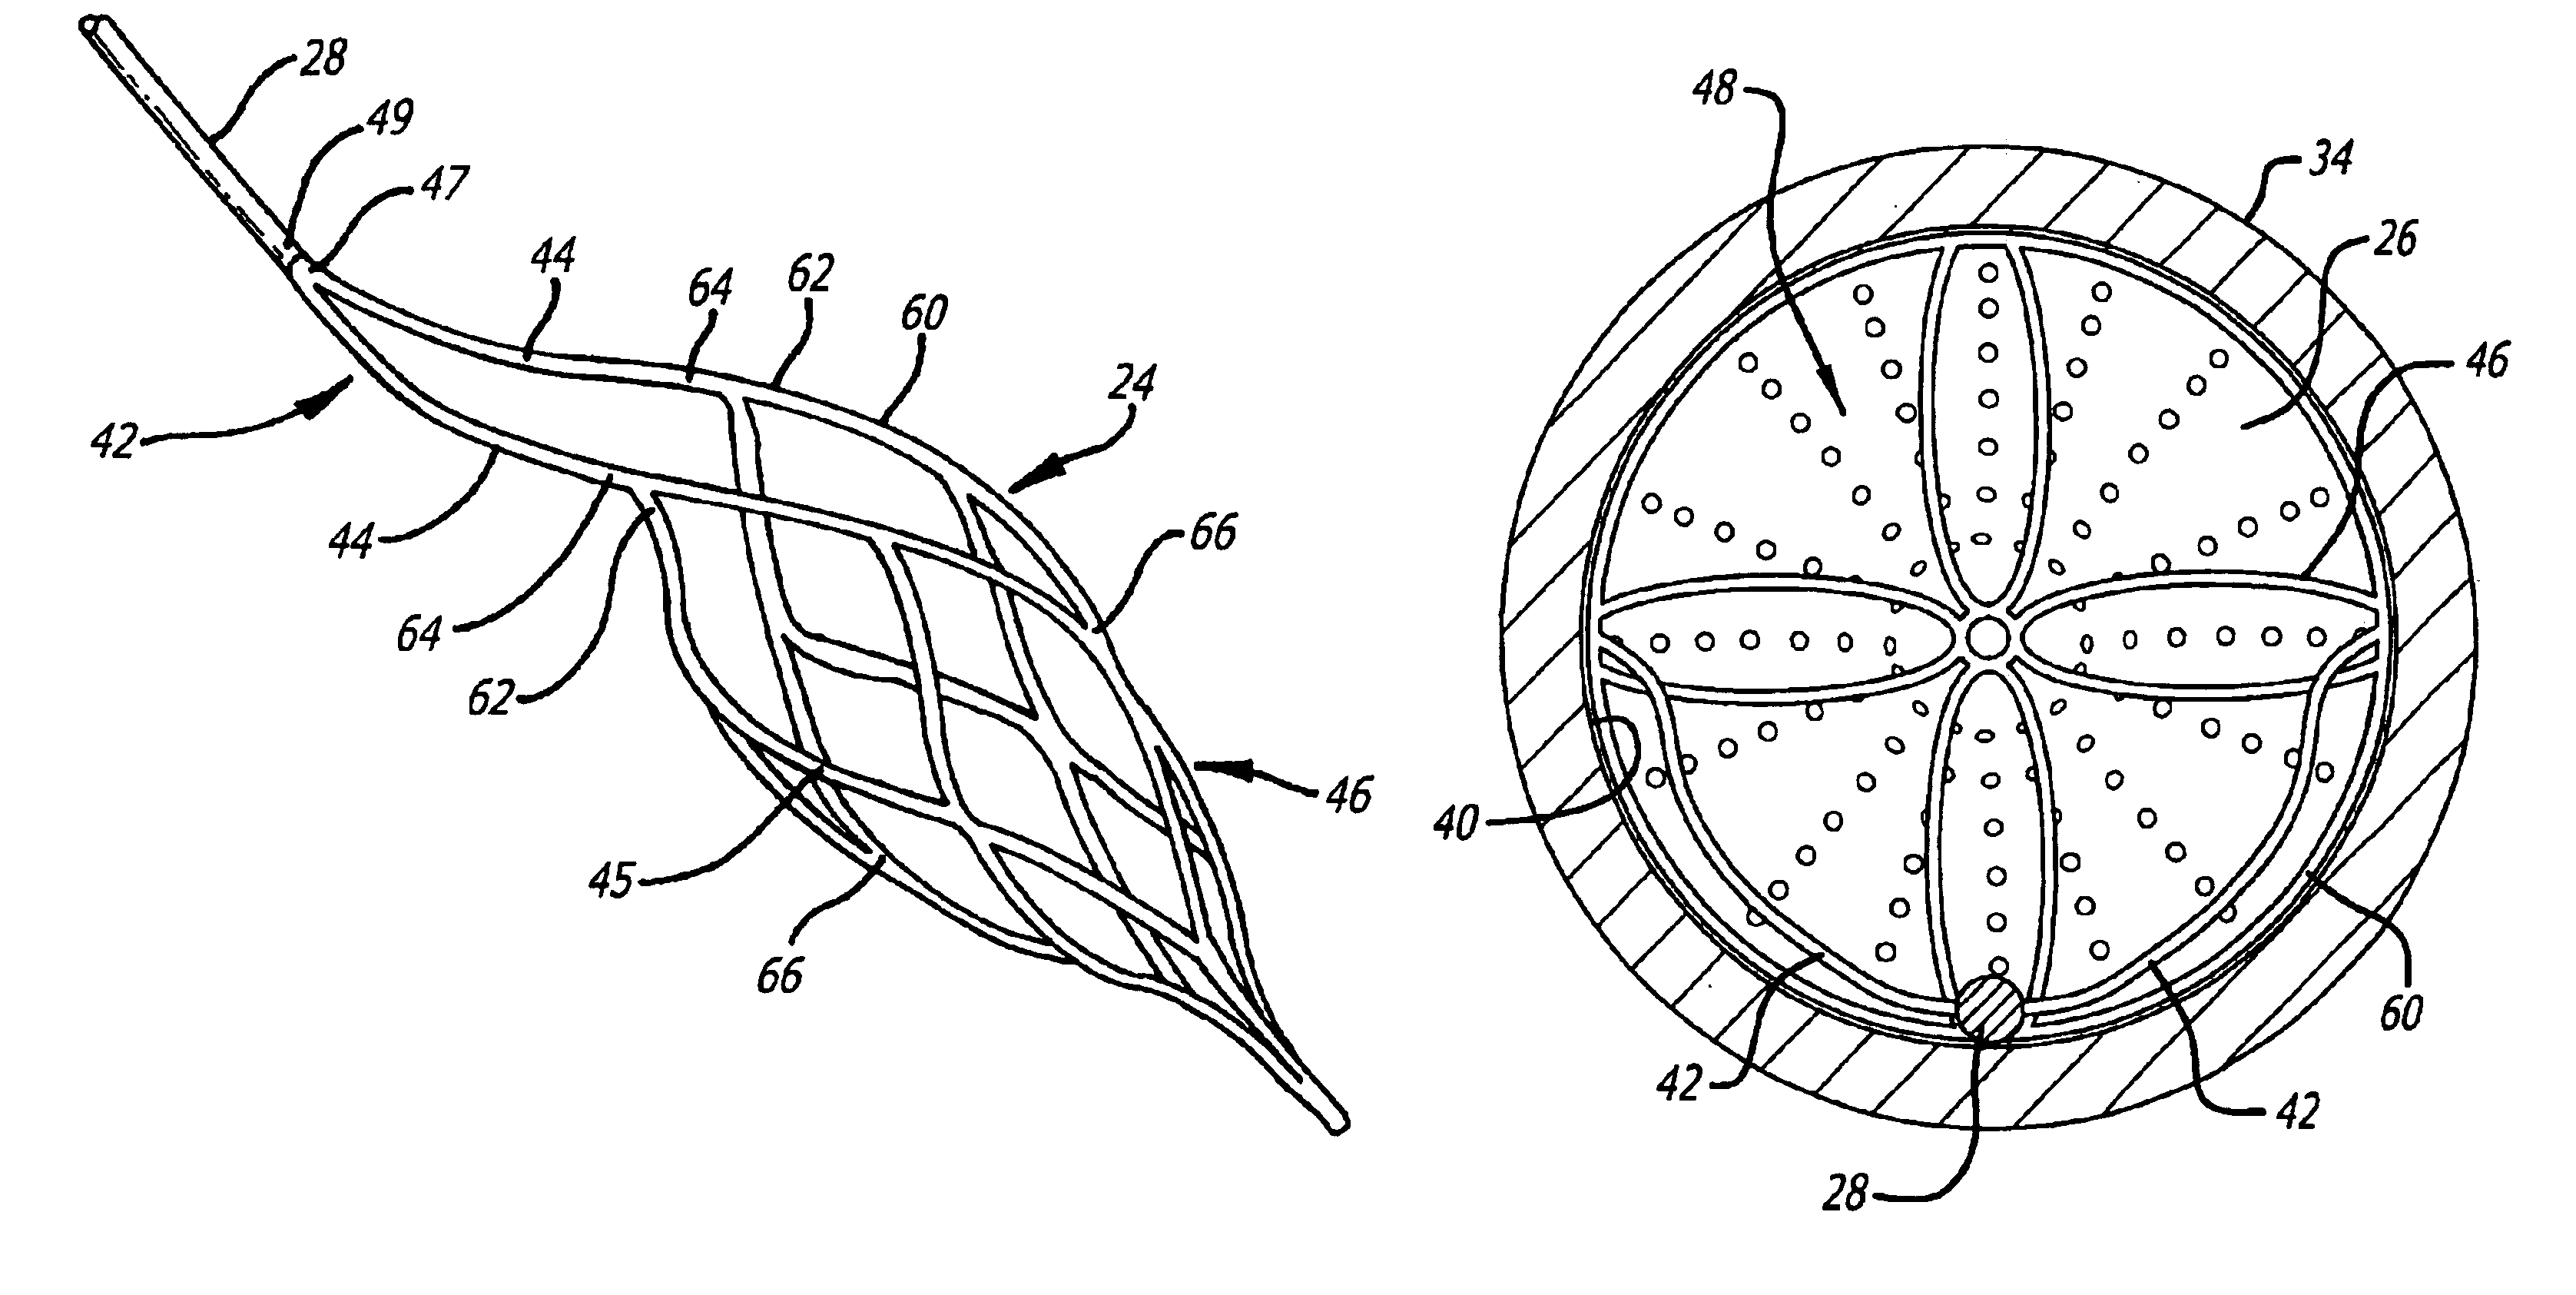 Offset proximal cage for embolic filtering devices